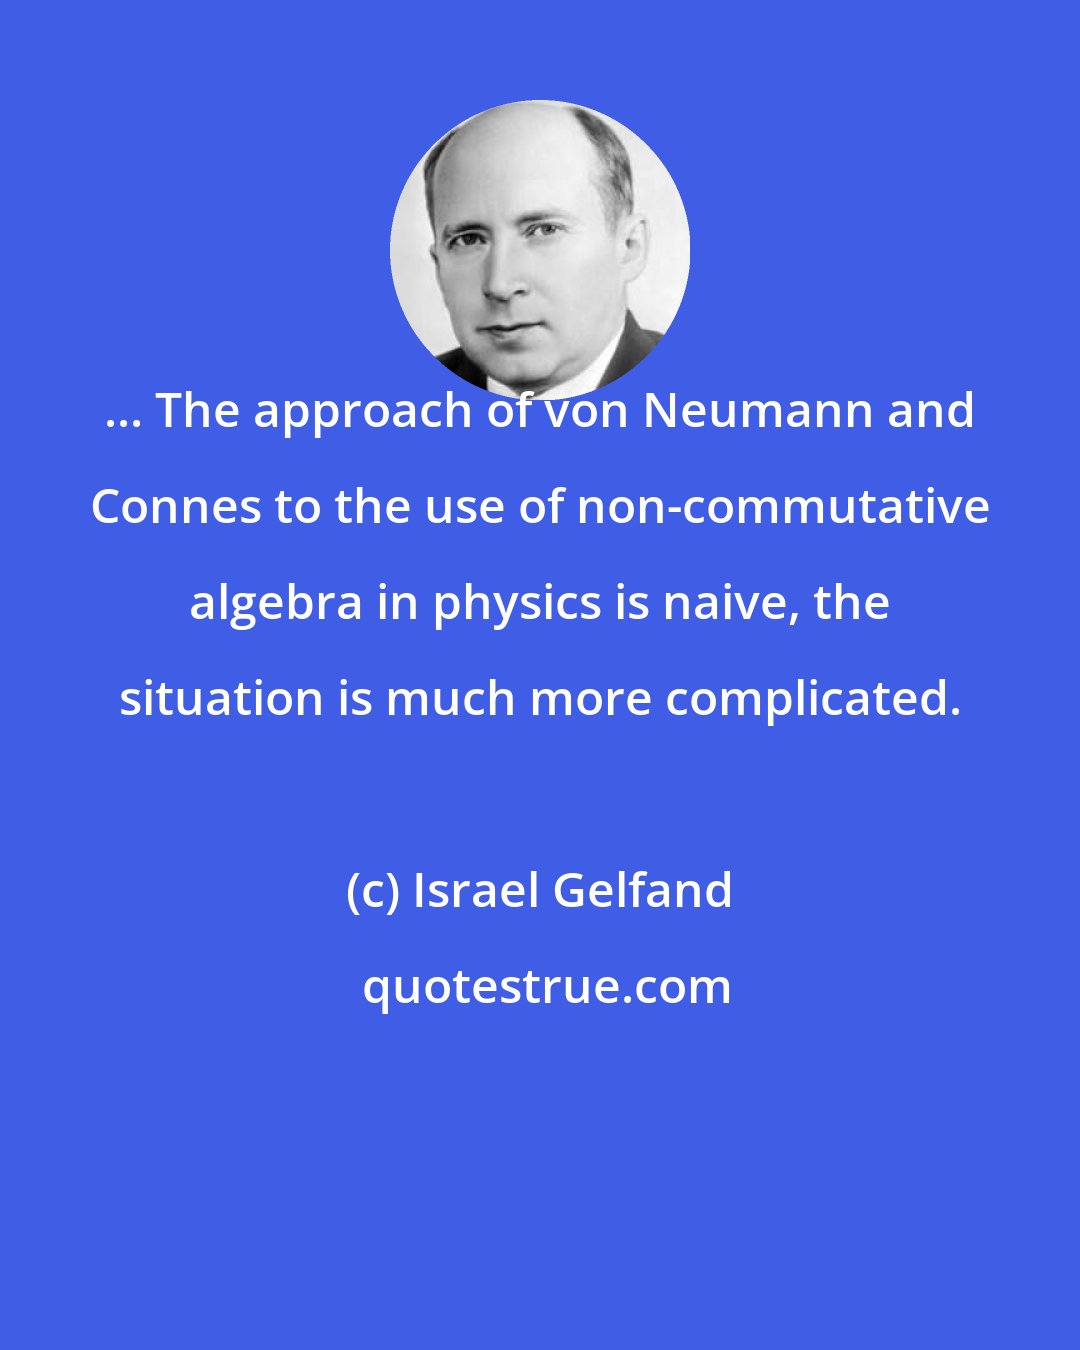 Israel Gelfand: ... The approach of von Neumann and Connes to the use of non-commutative algebra in physics is naive, the situation is much more complicated.